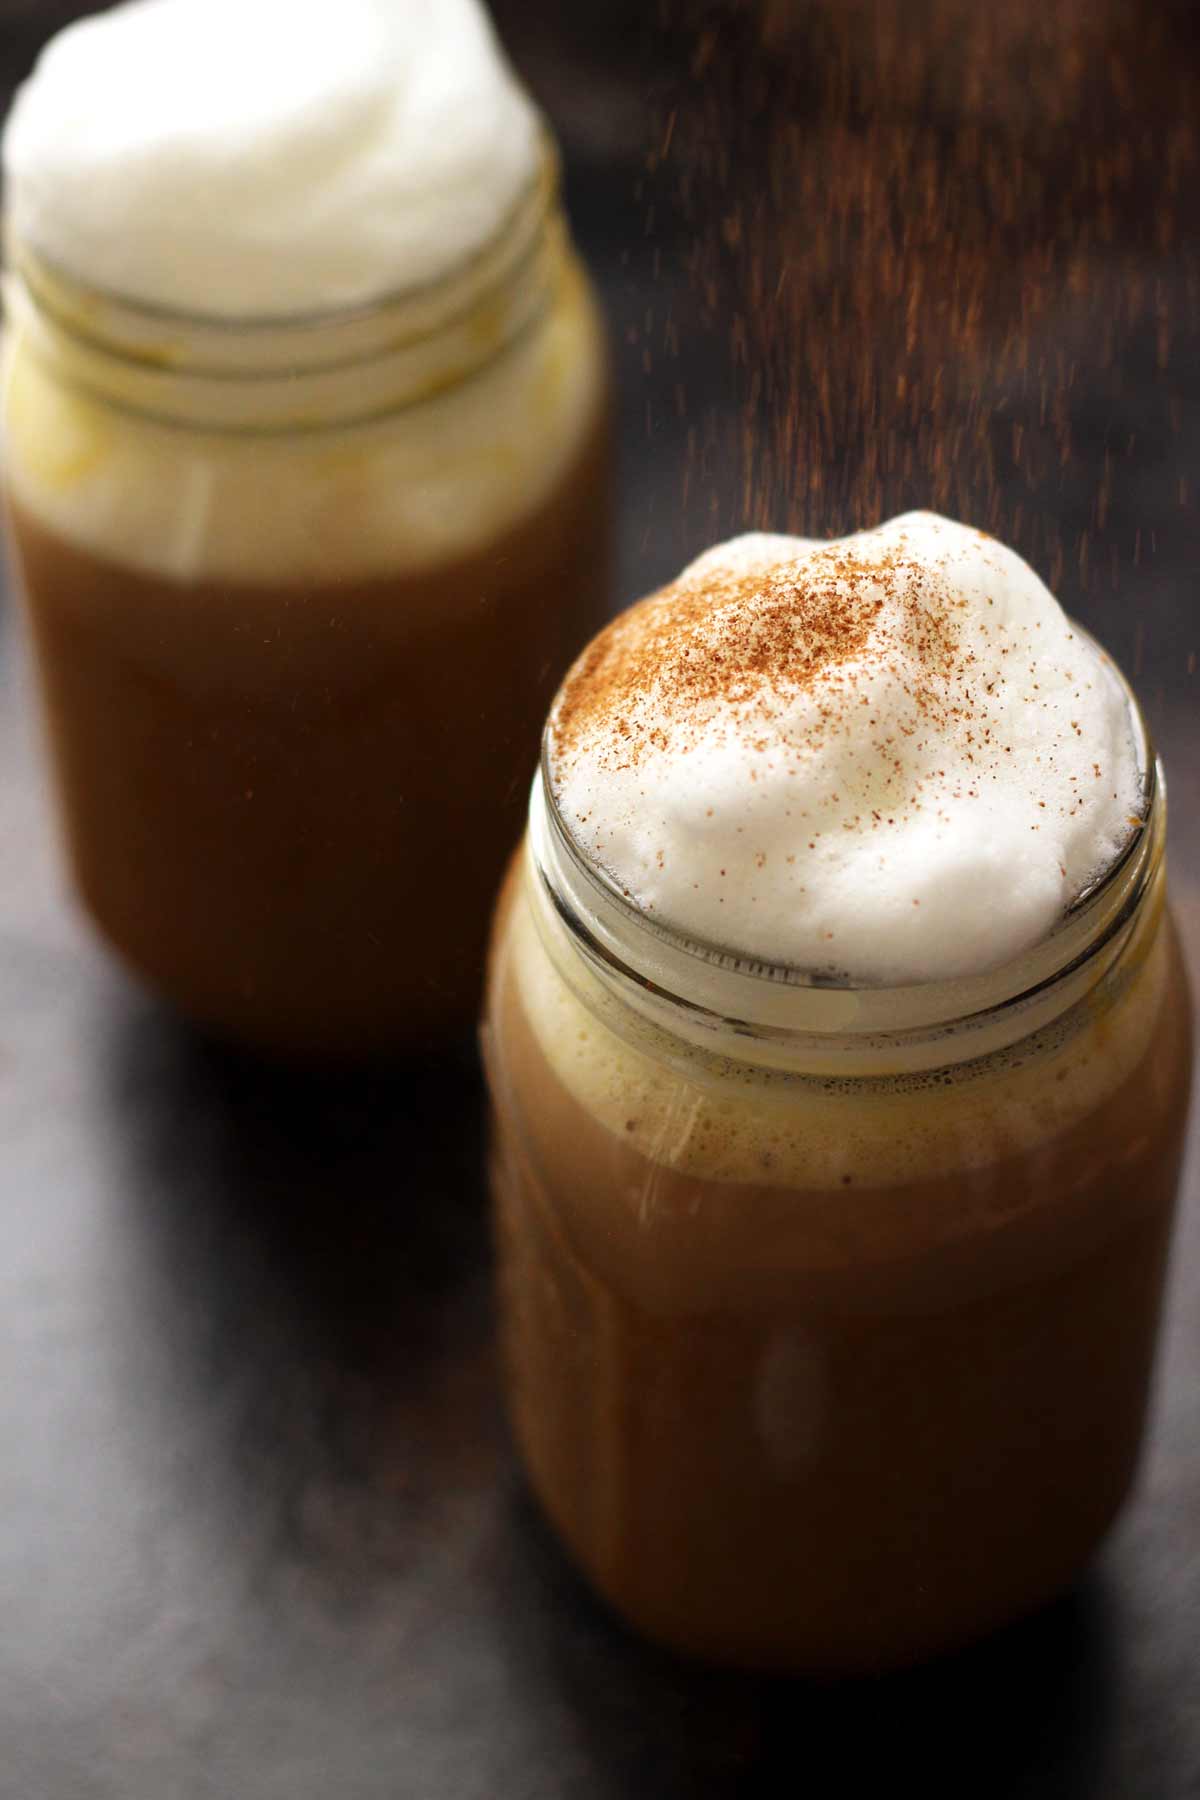 Two jars of coffee with whipped cream and cinnamon.